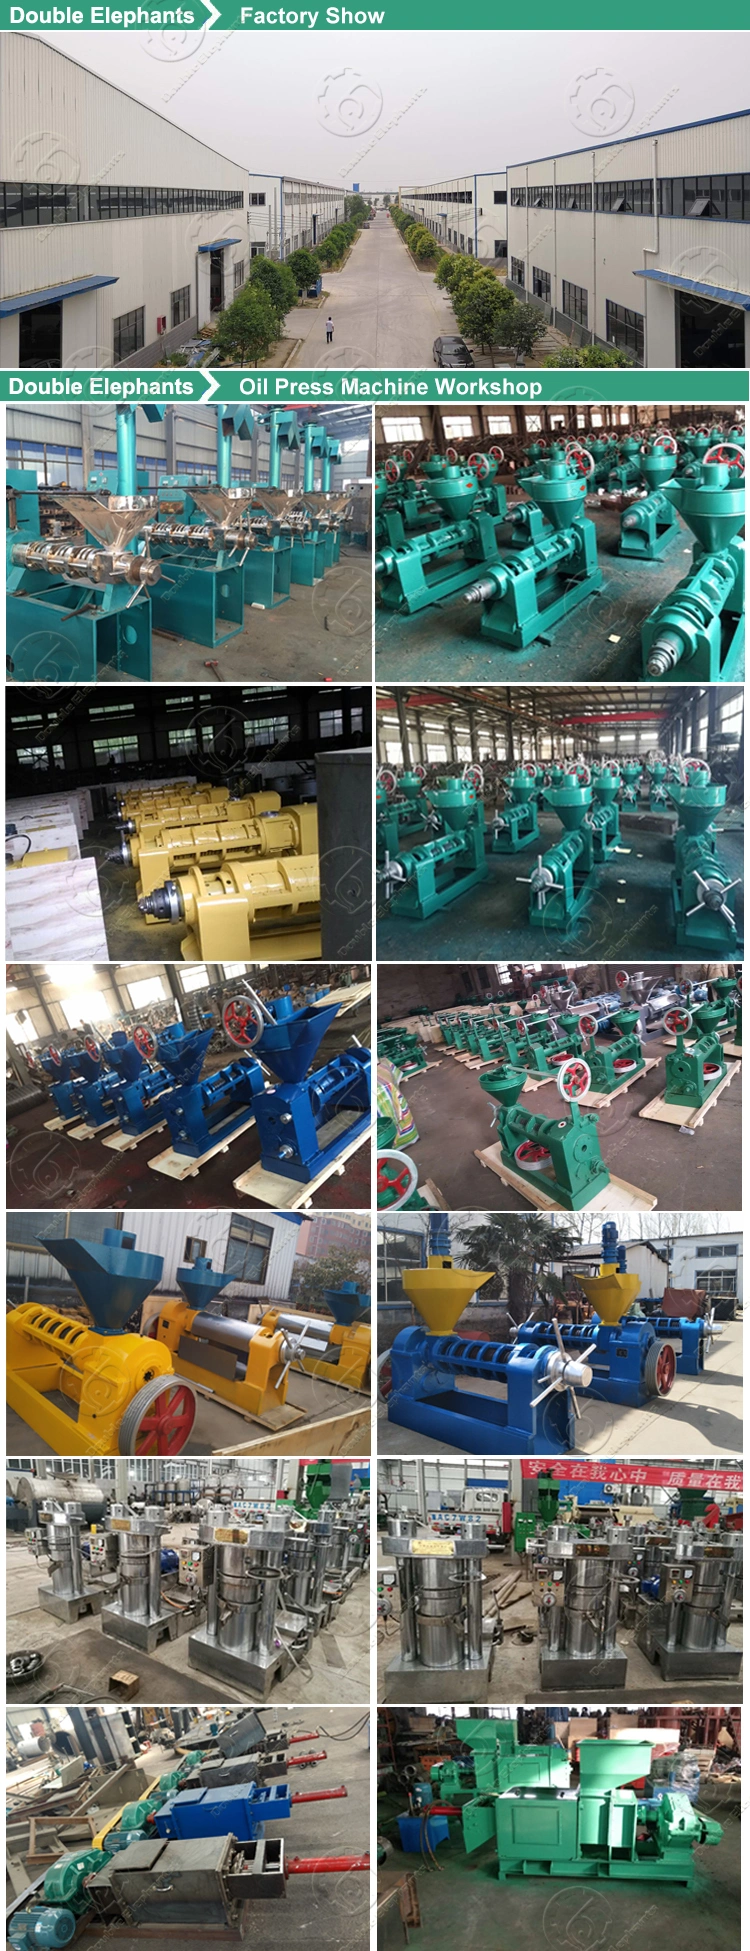 Niger Oil Press Commercial Press Oil Seed Coconut Oil Cold Processing Machine